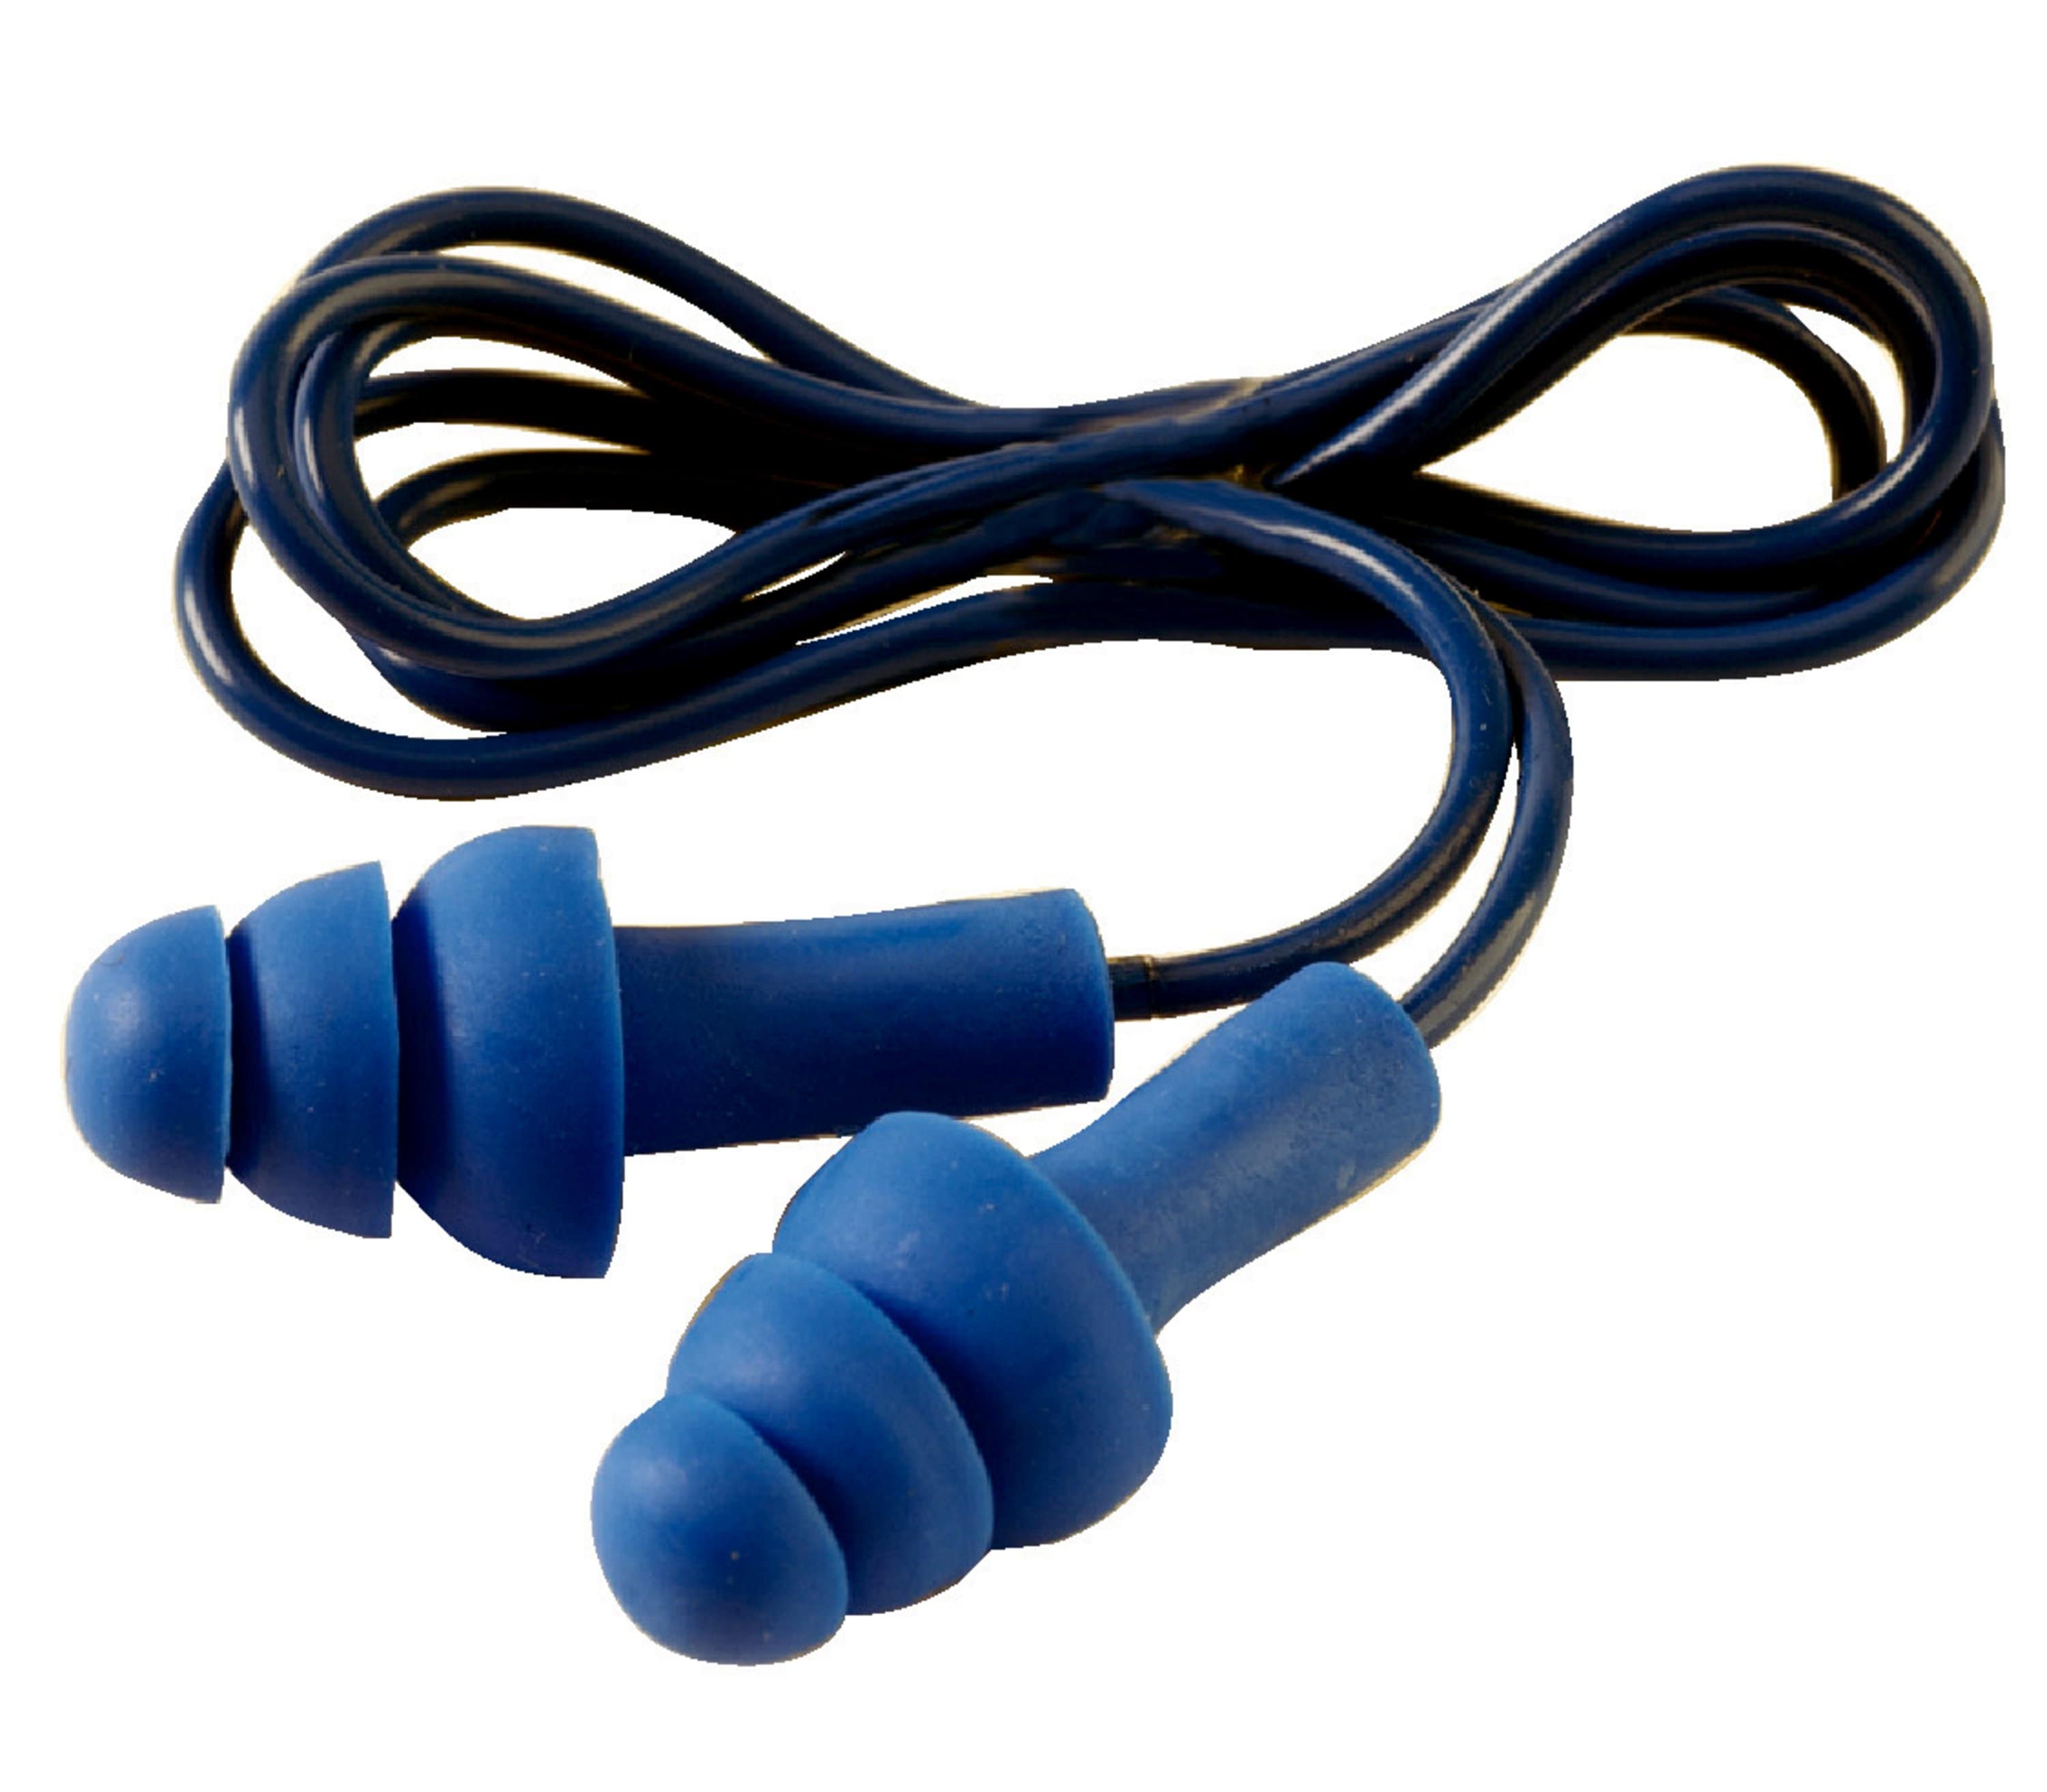 3M E.A.R Tracers Series Blue Reusable Corded Ear Plugs, 32dB Rated, Metal Detectable, 50 Pairs